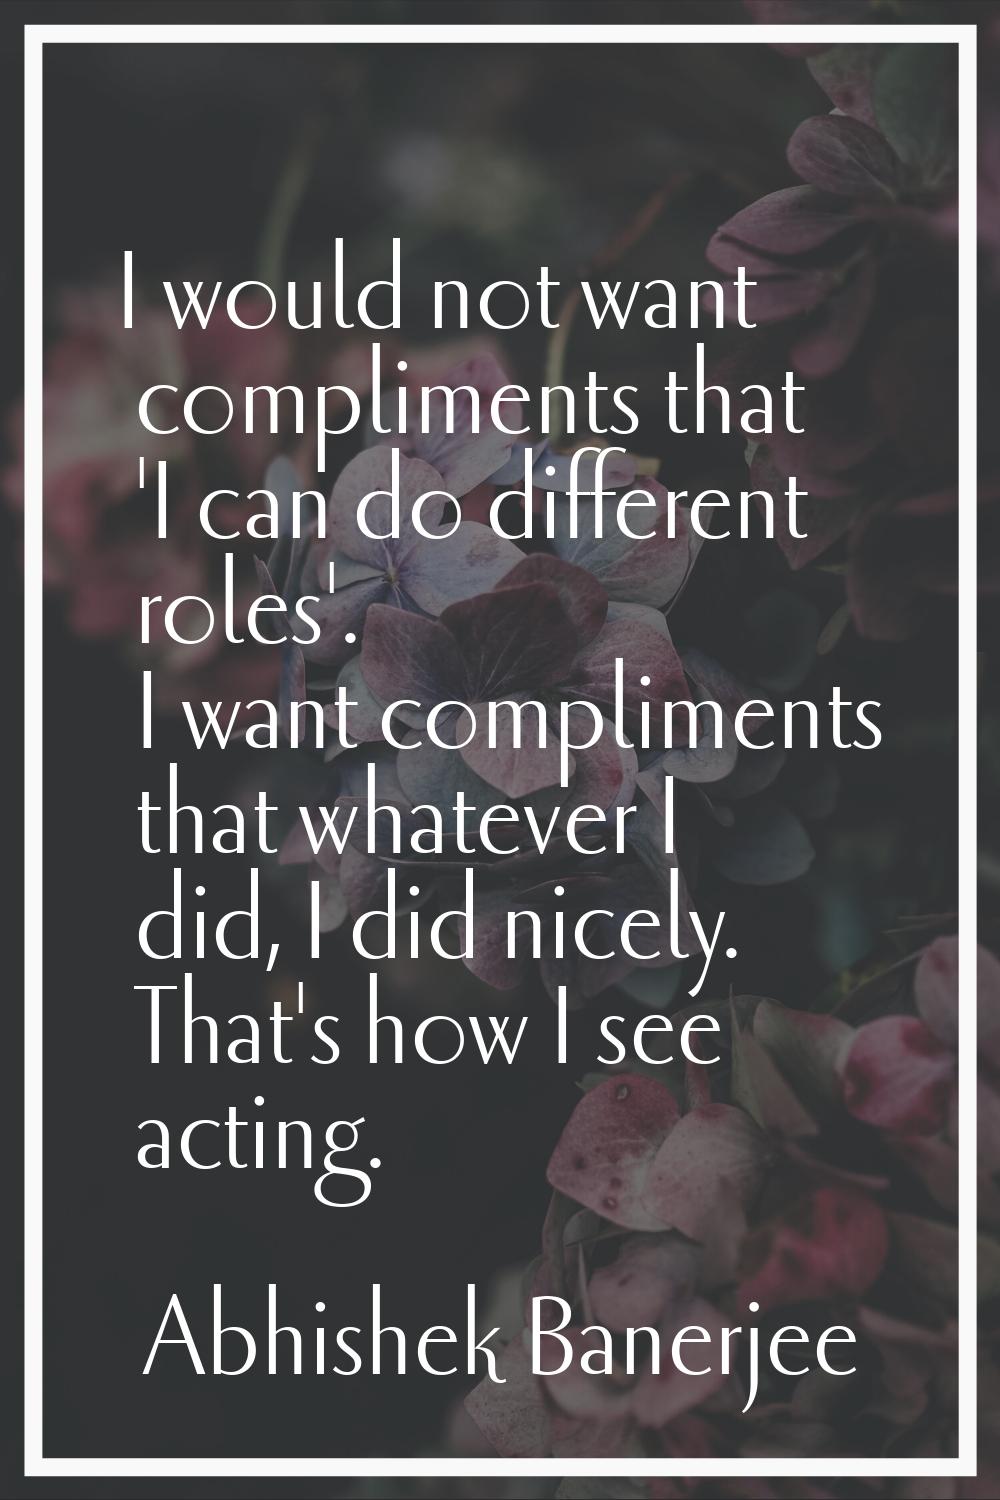 I would not want compliments that 'I can do different roles'. I want compliments that whatever I di